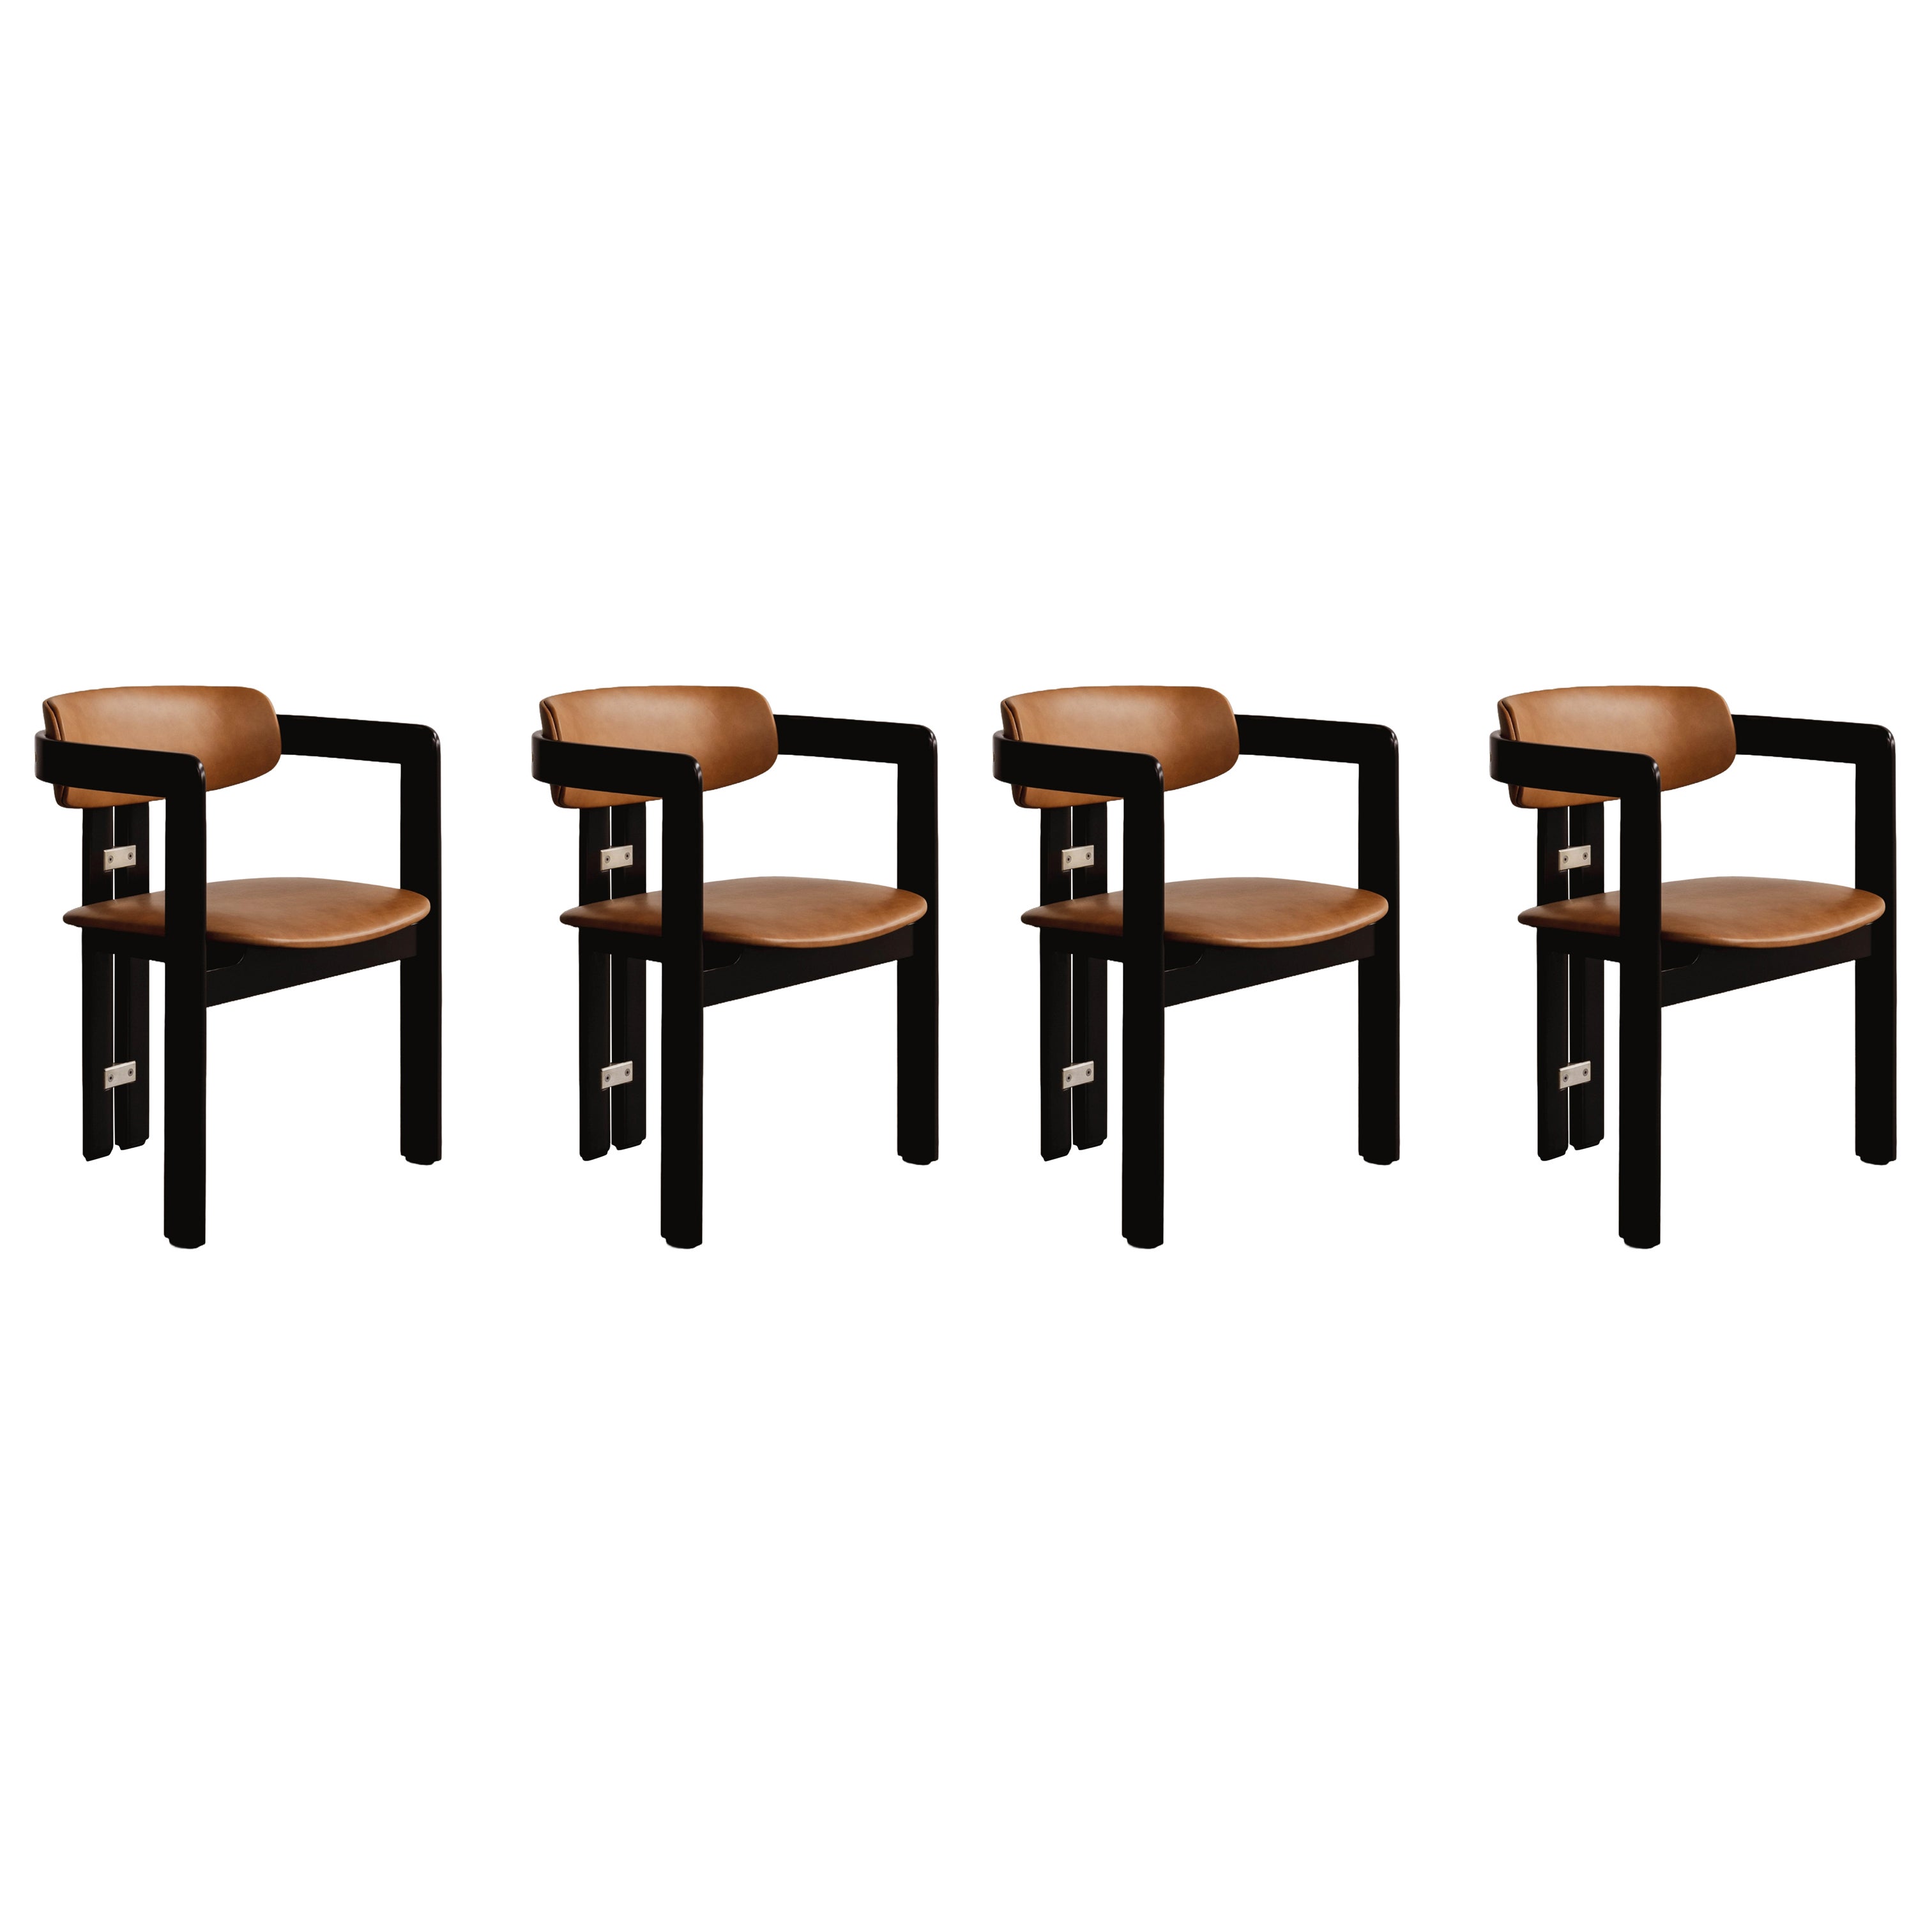 Augusto Savini “Pamplona” Dining Chairs for Pozzi, 1965, Set of 4